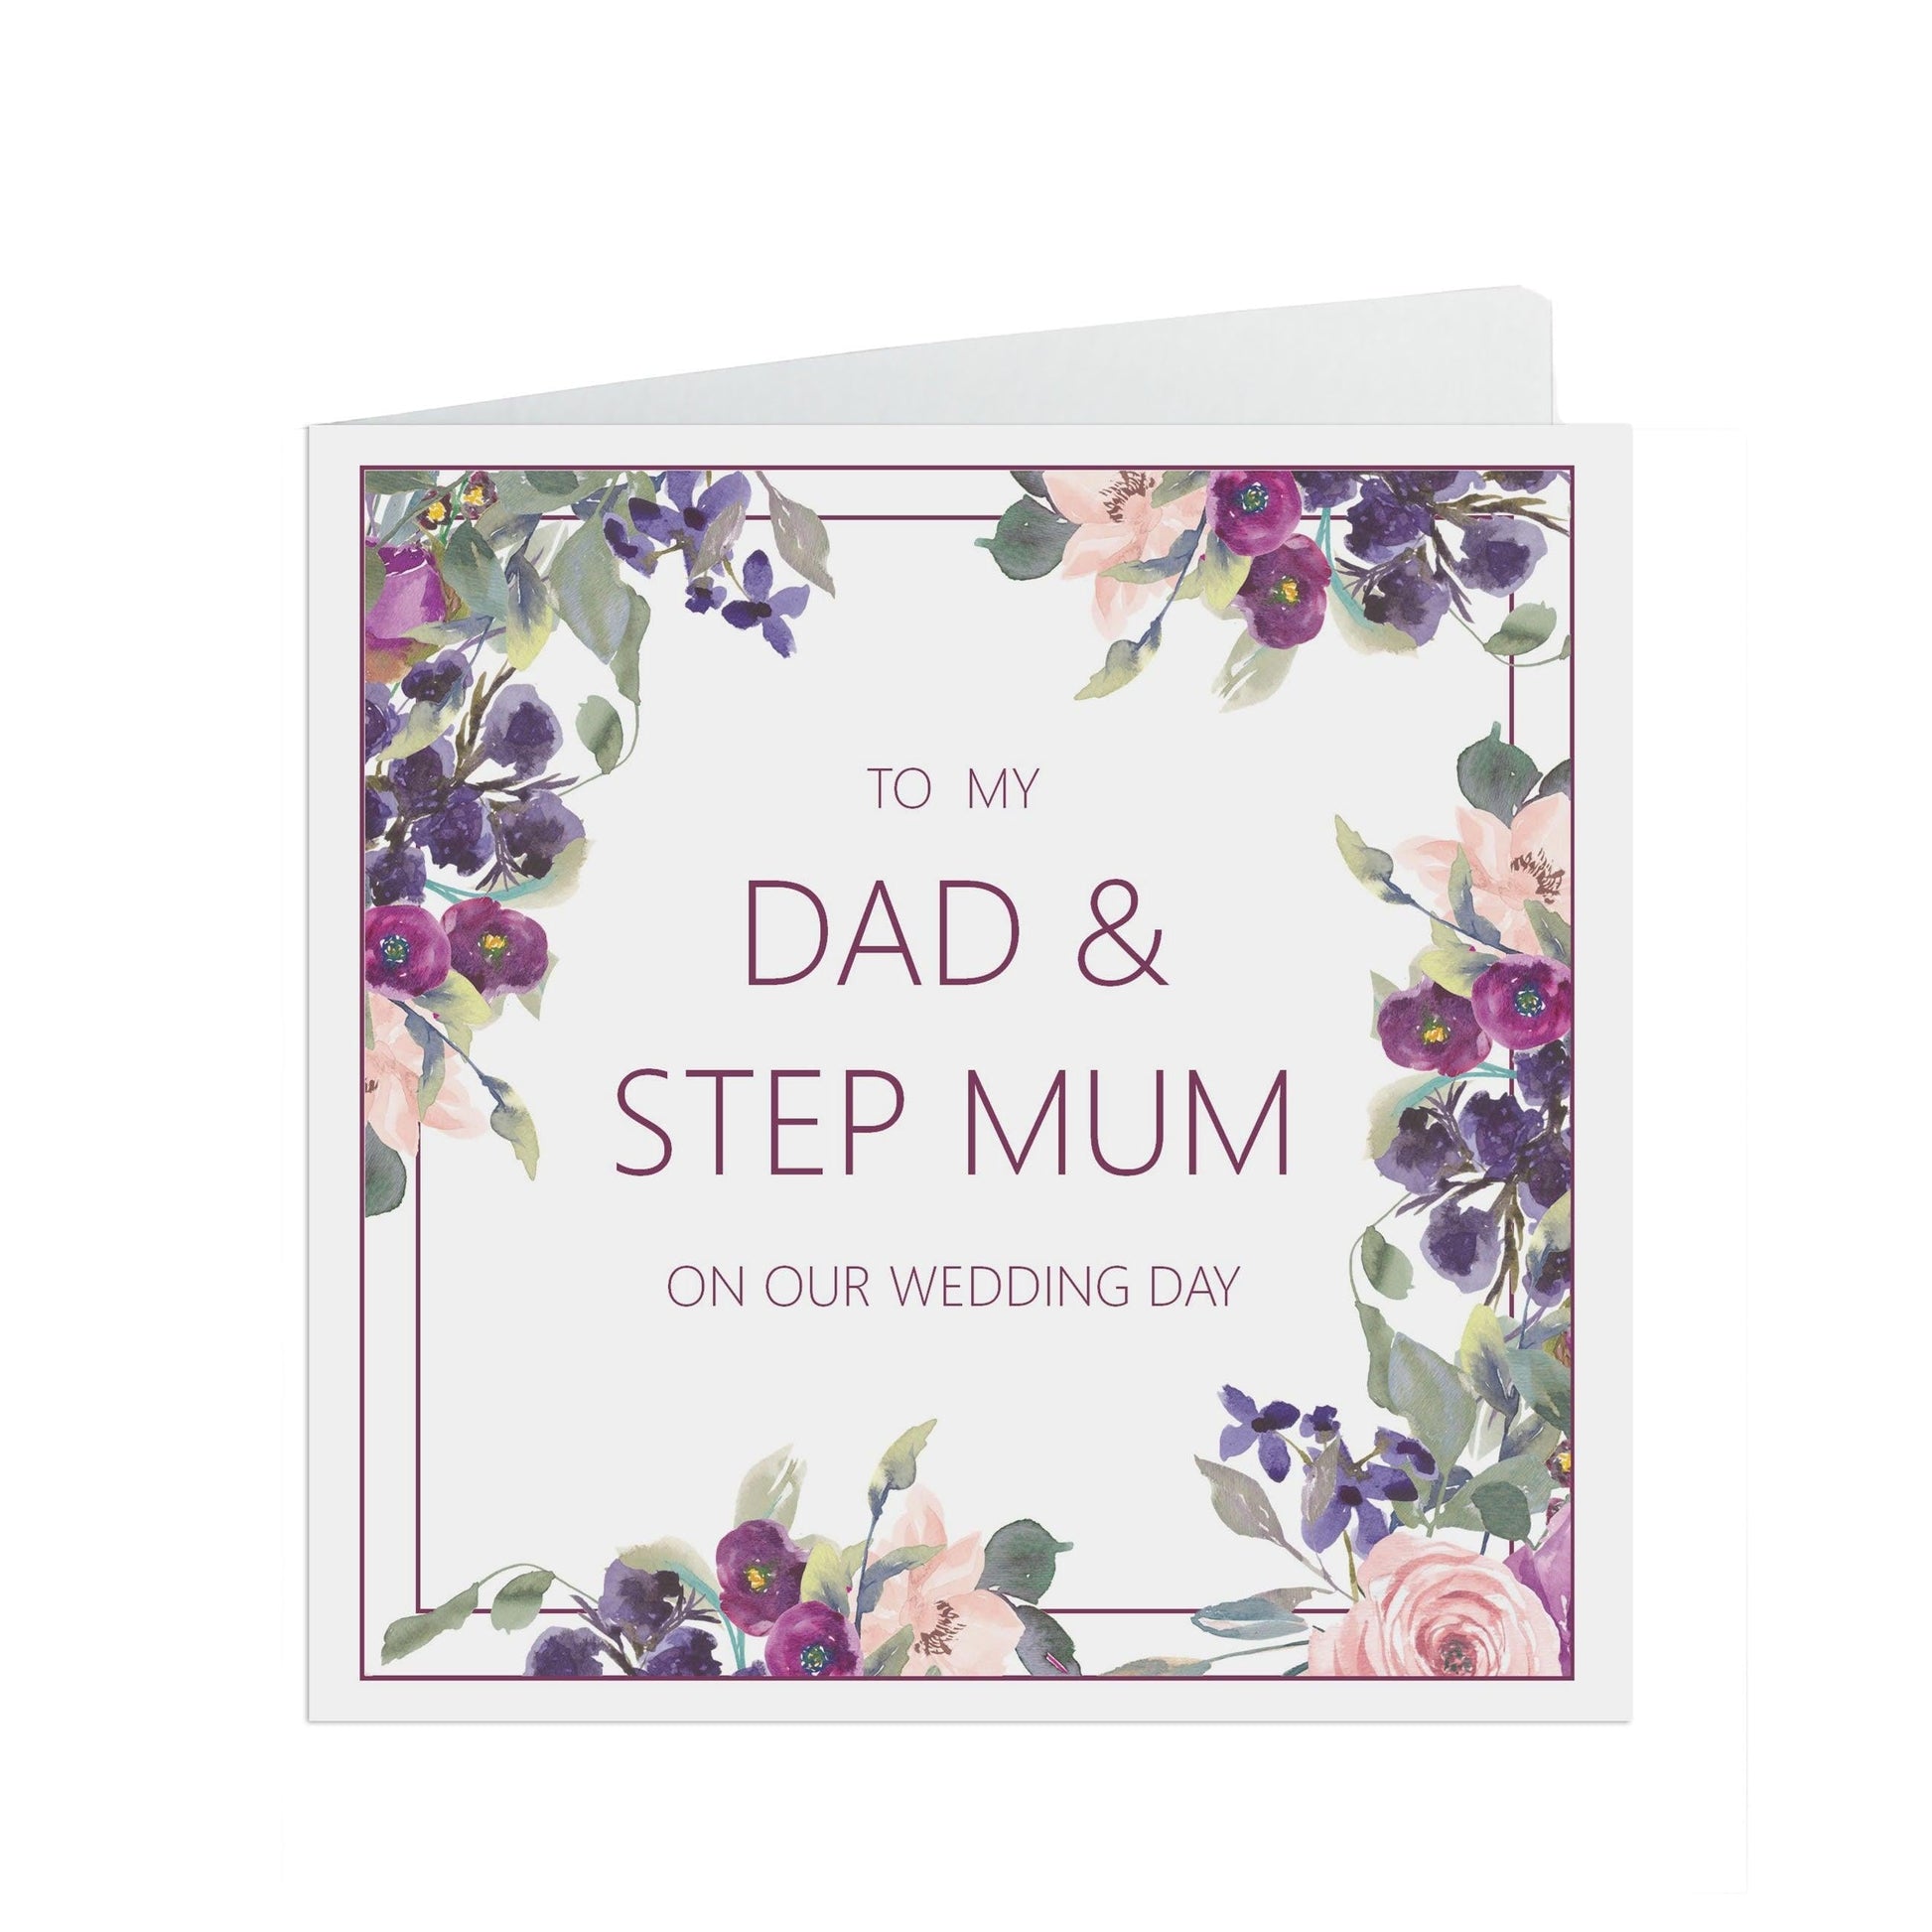  Dad & Step Mum Wedding Day Card, Purple Floral 6x6 Inches With A Kraft Envelope by PMPRINTED 